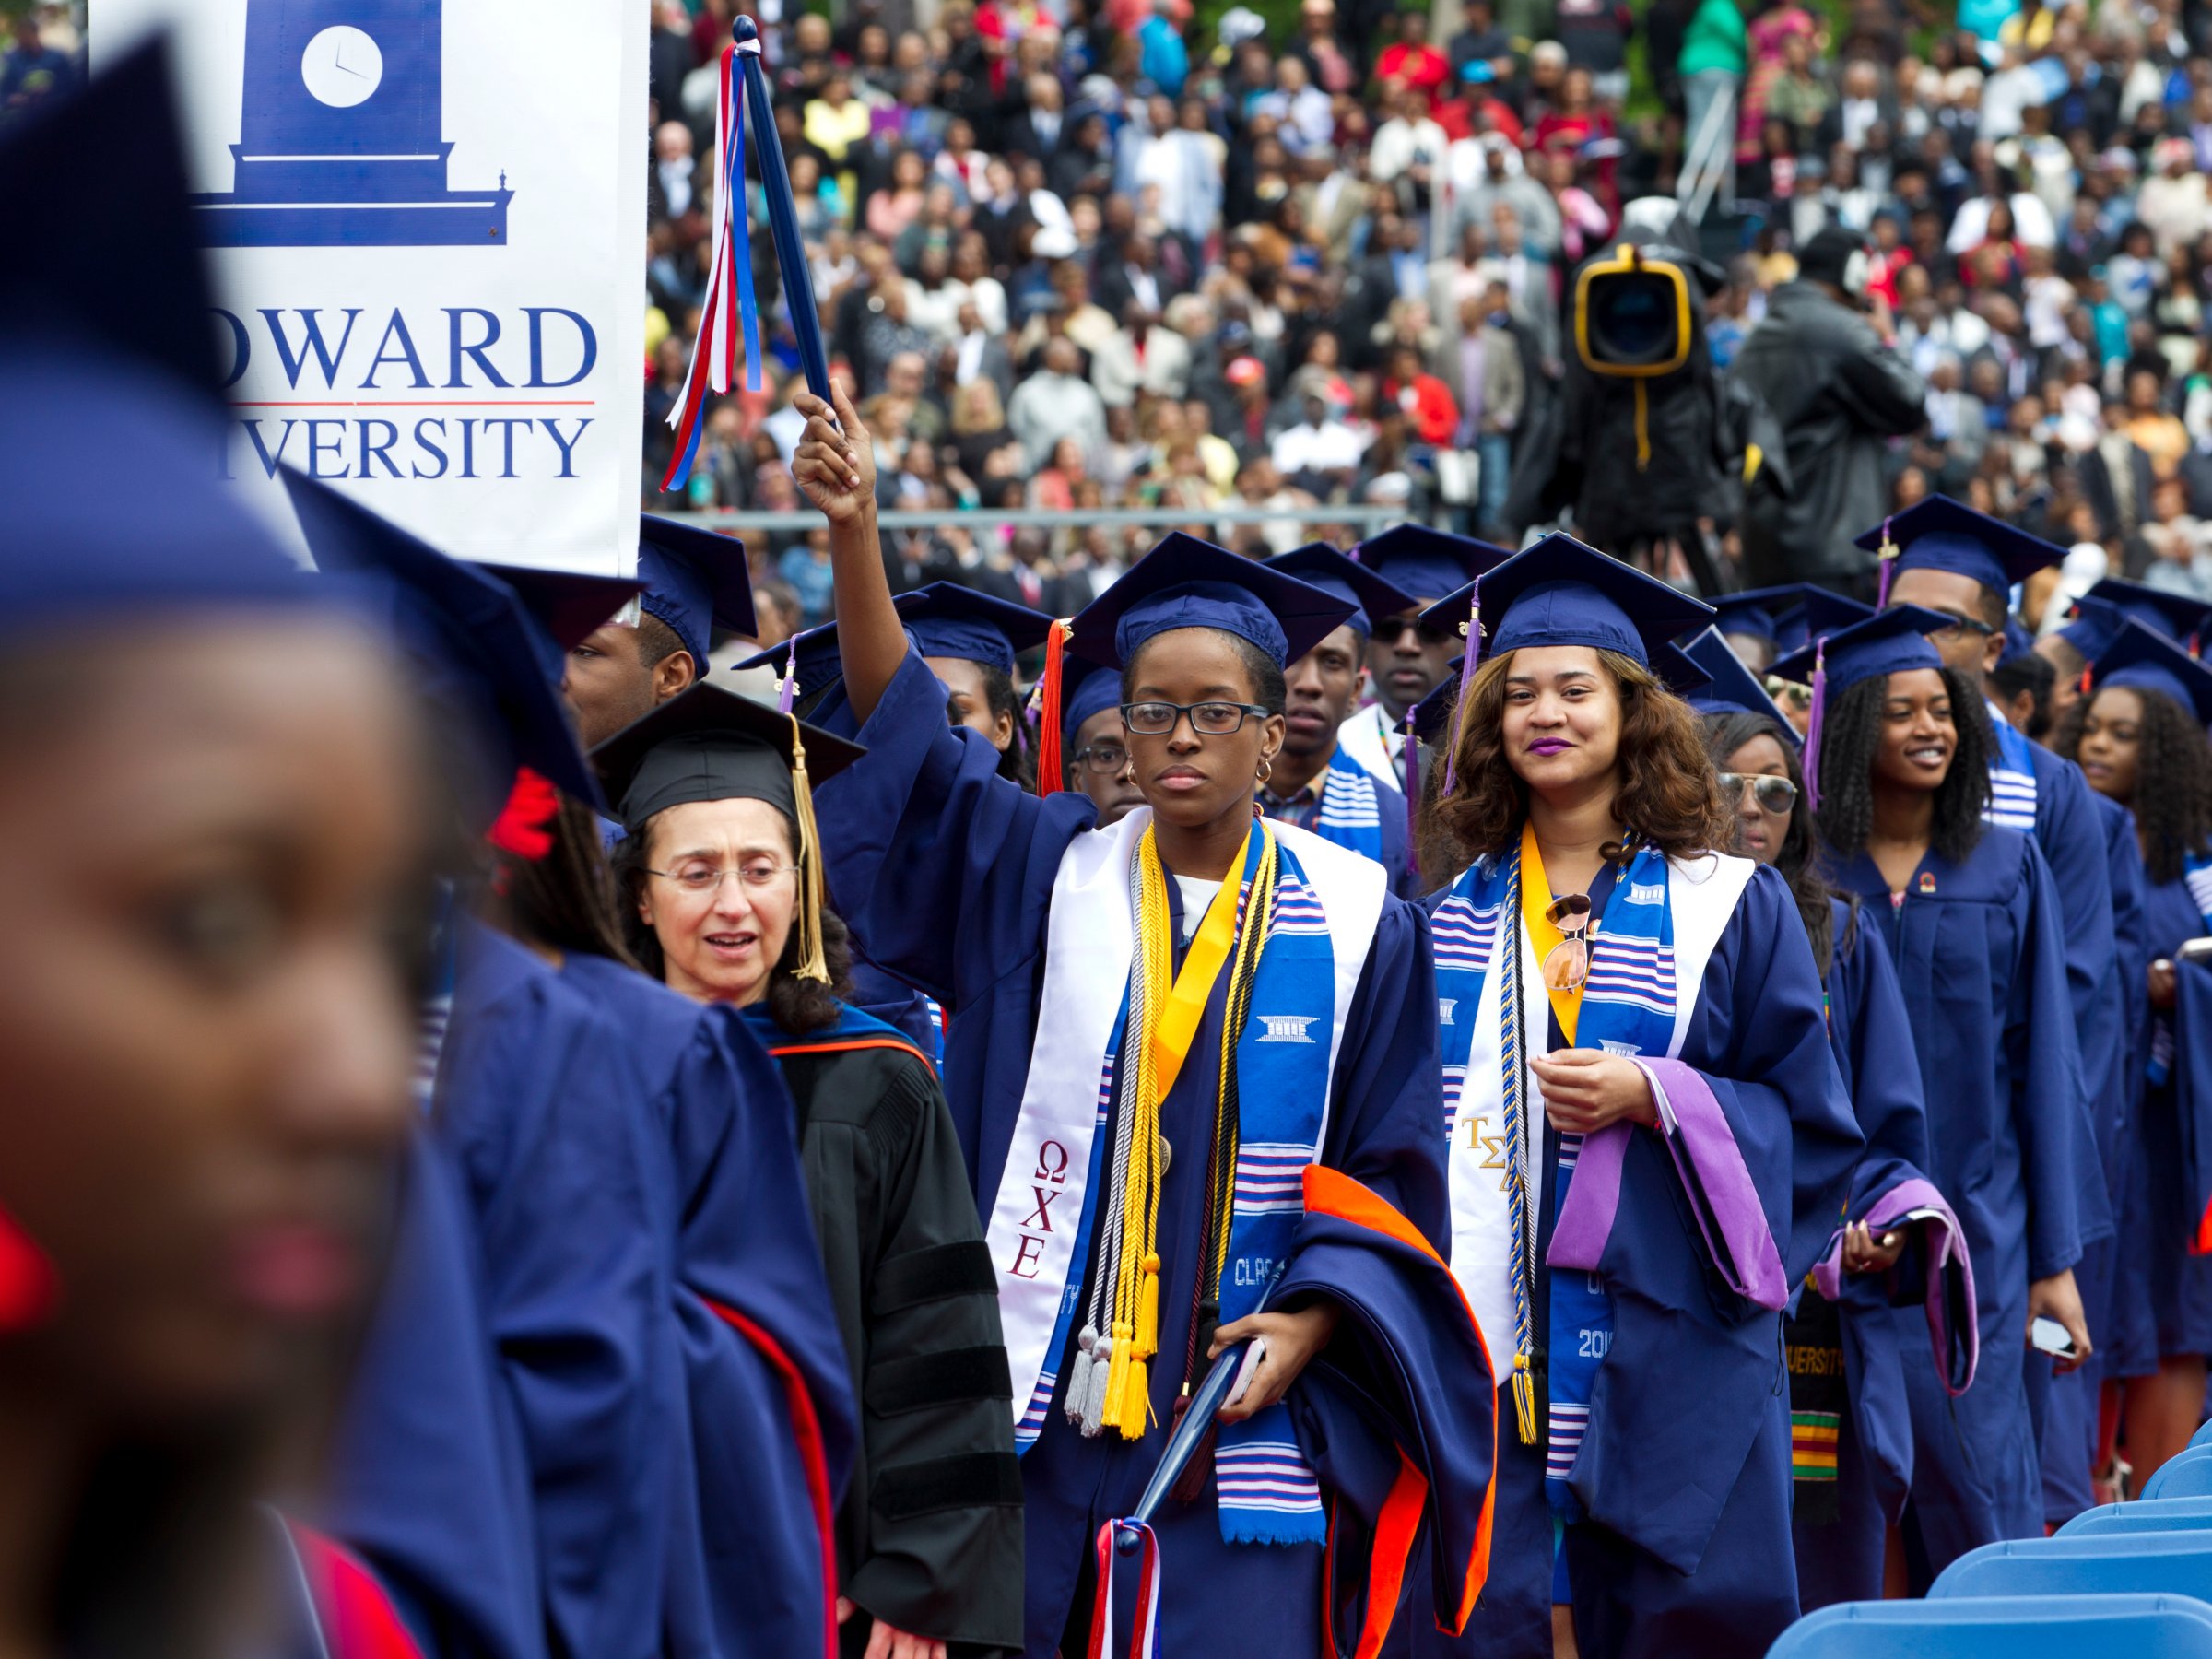 Graduate students walk to their places as their arrive to the 2016 Howard University graduation ceremony in Washington, Saturday, May 7, 2016.